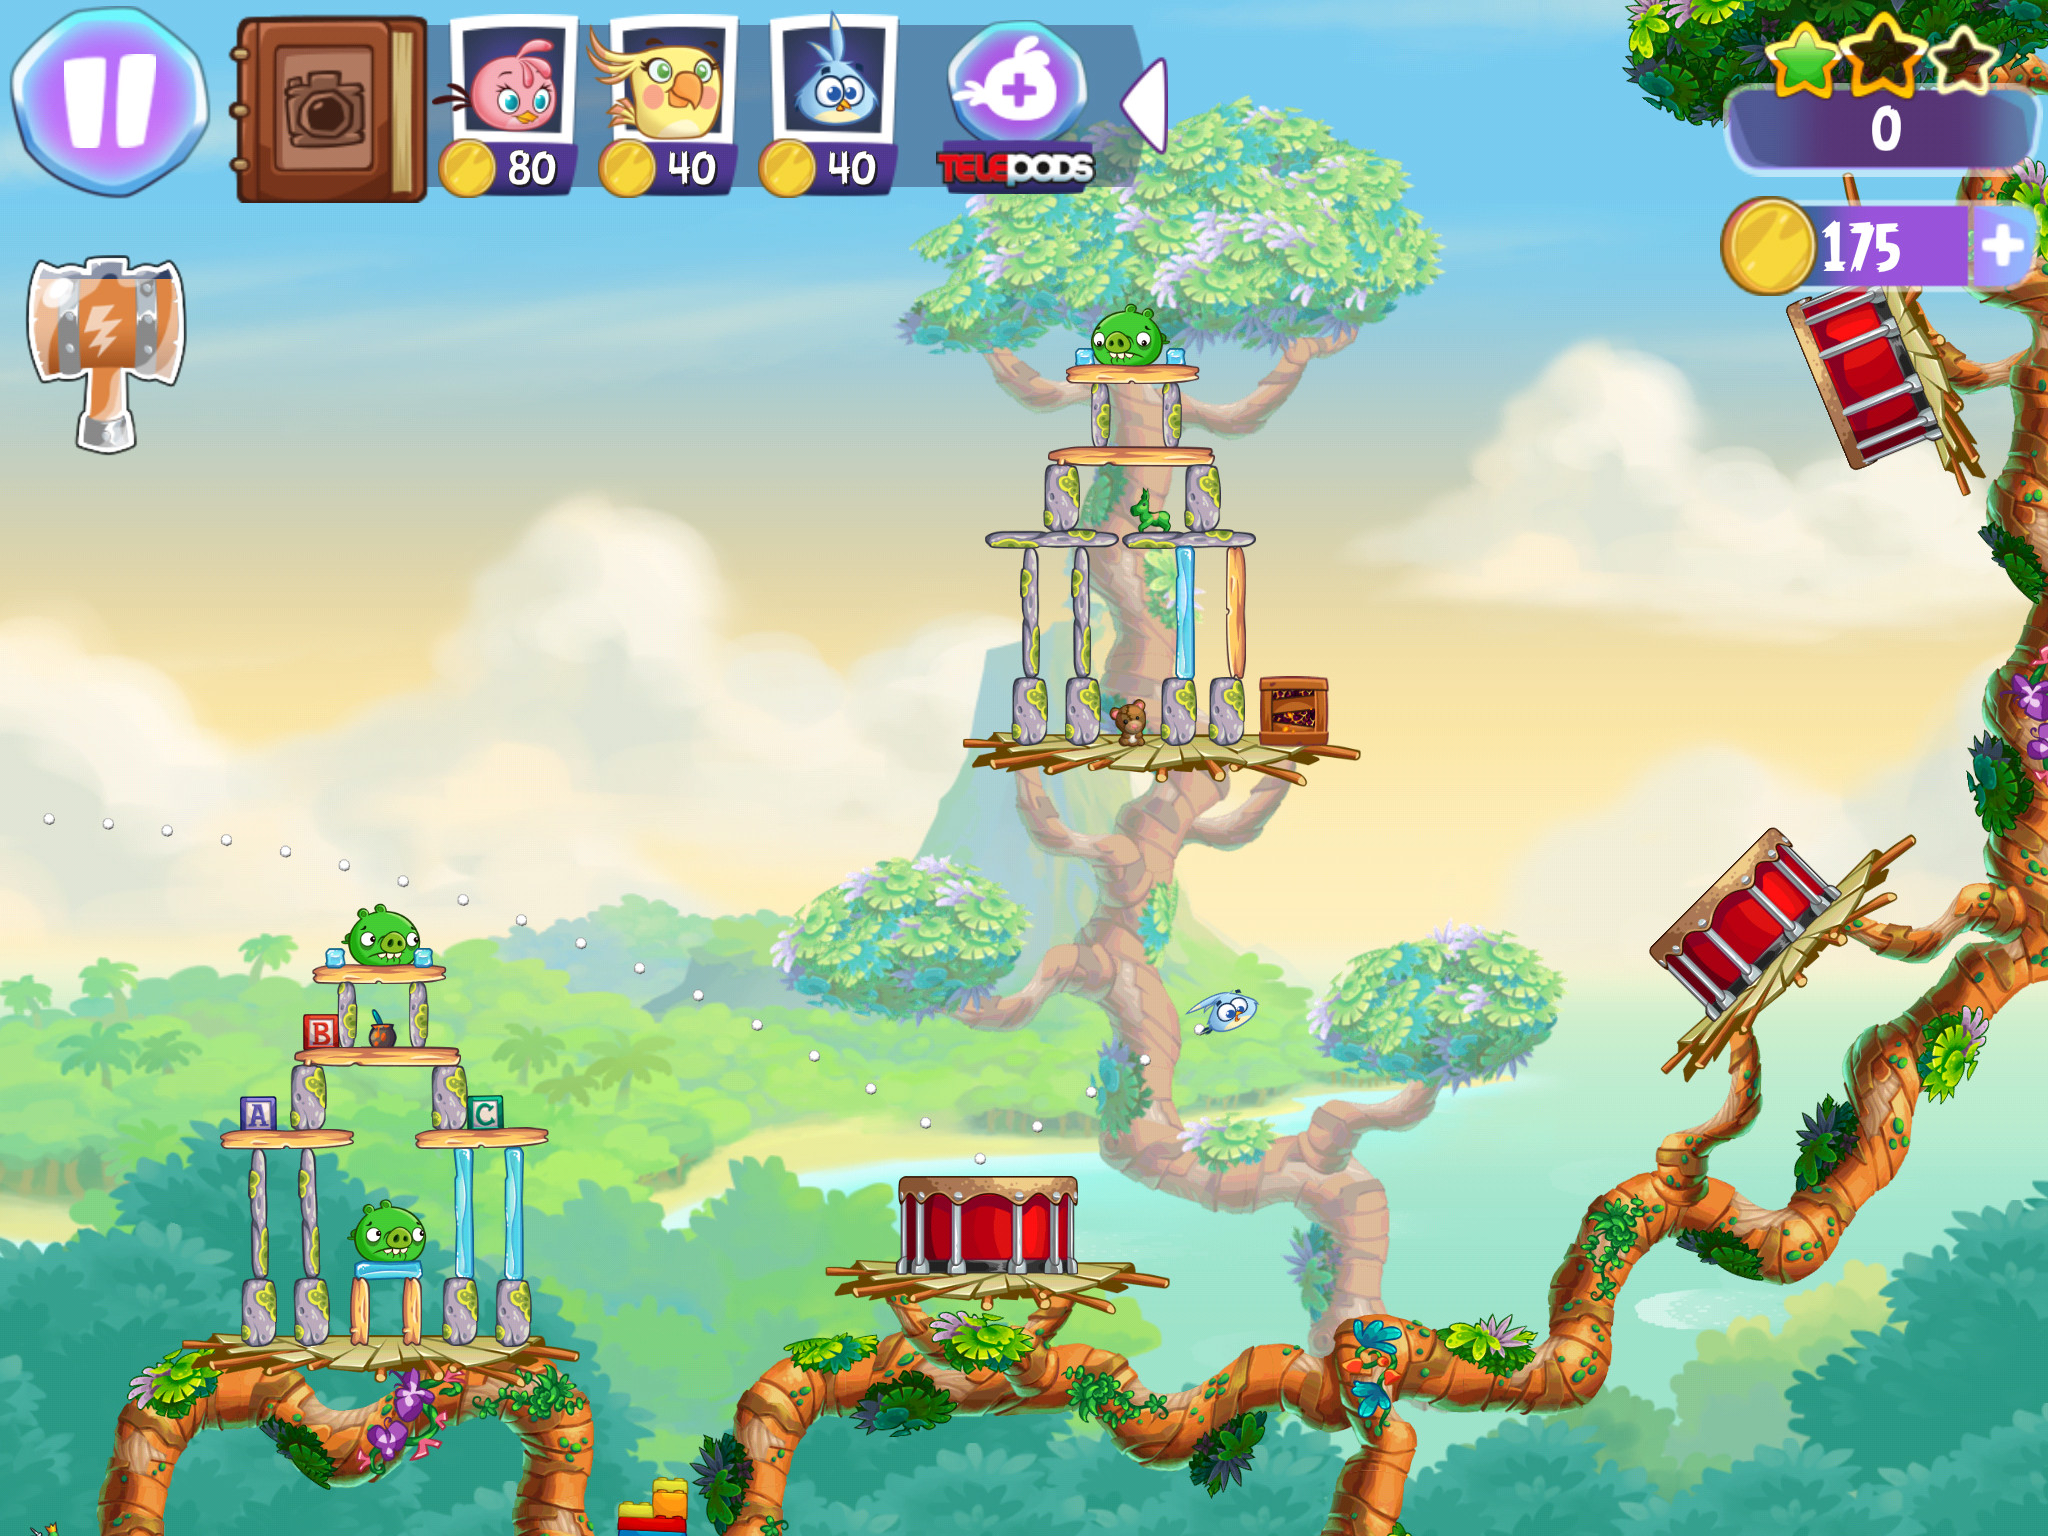 Angry Birds Stella, the latest in the Angry Birds series, is out right now for iOS and Android